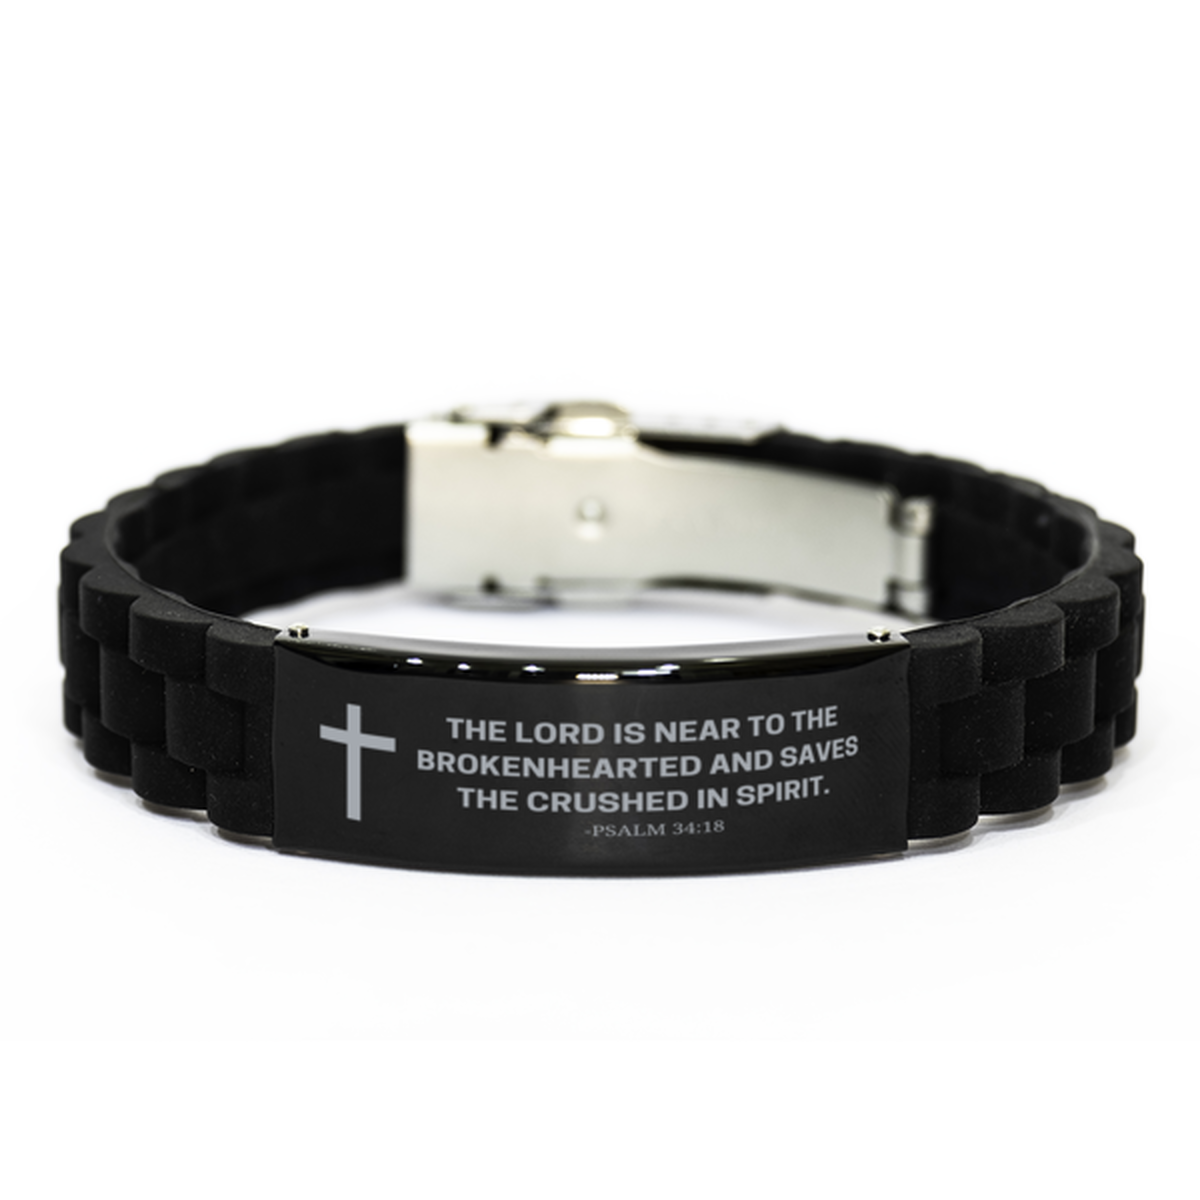 Baptism Gifts For Teenage Boys Girls, Christian Bible Verse Black Glidelock Clasp Bracelet, The Lord is near to the brokenhearted, Catholic Confirmation Gifts for Son, Godson, Grandson, Nephew